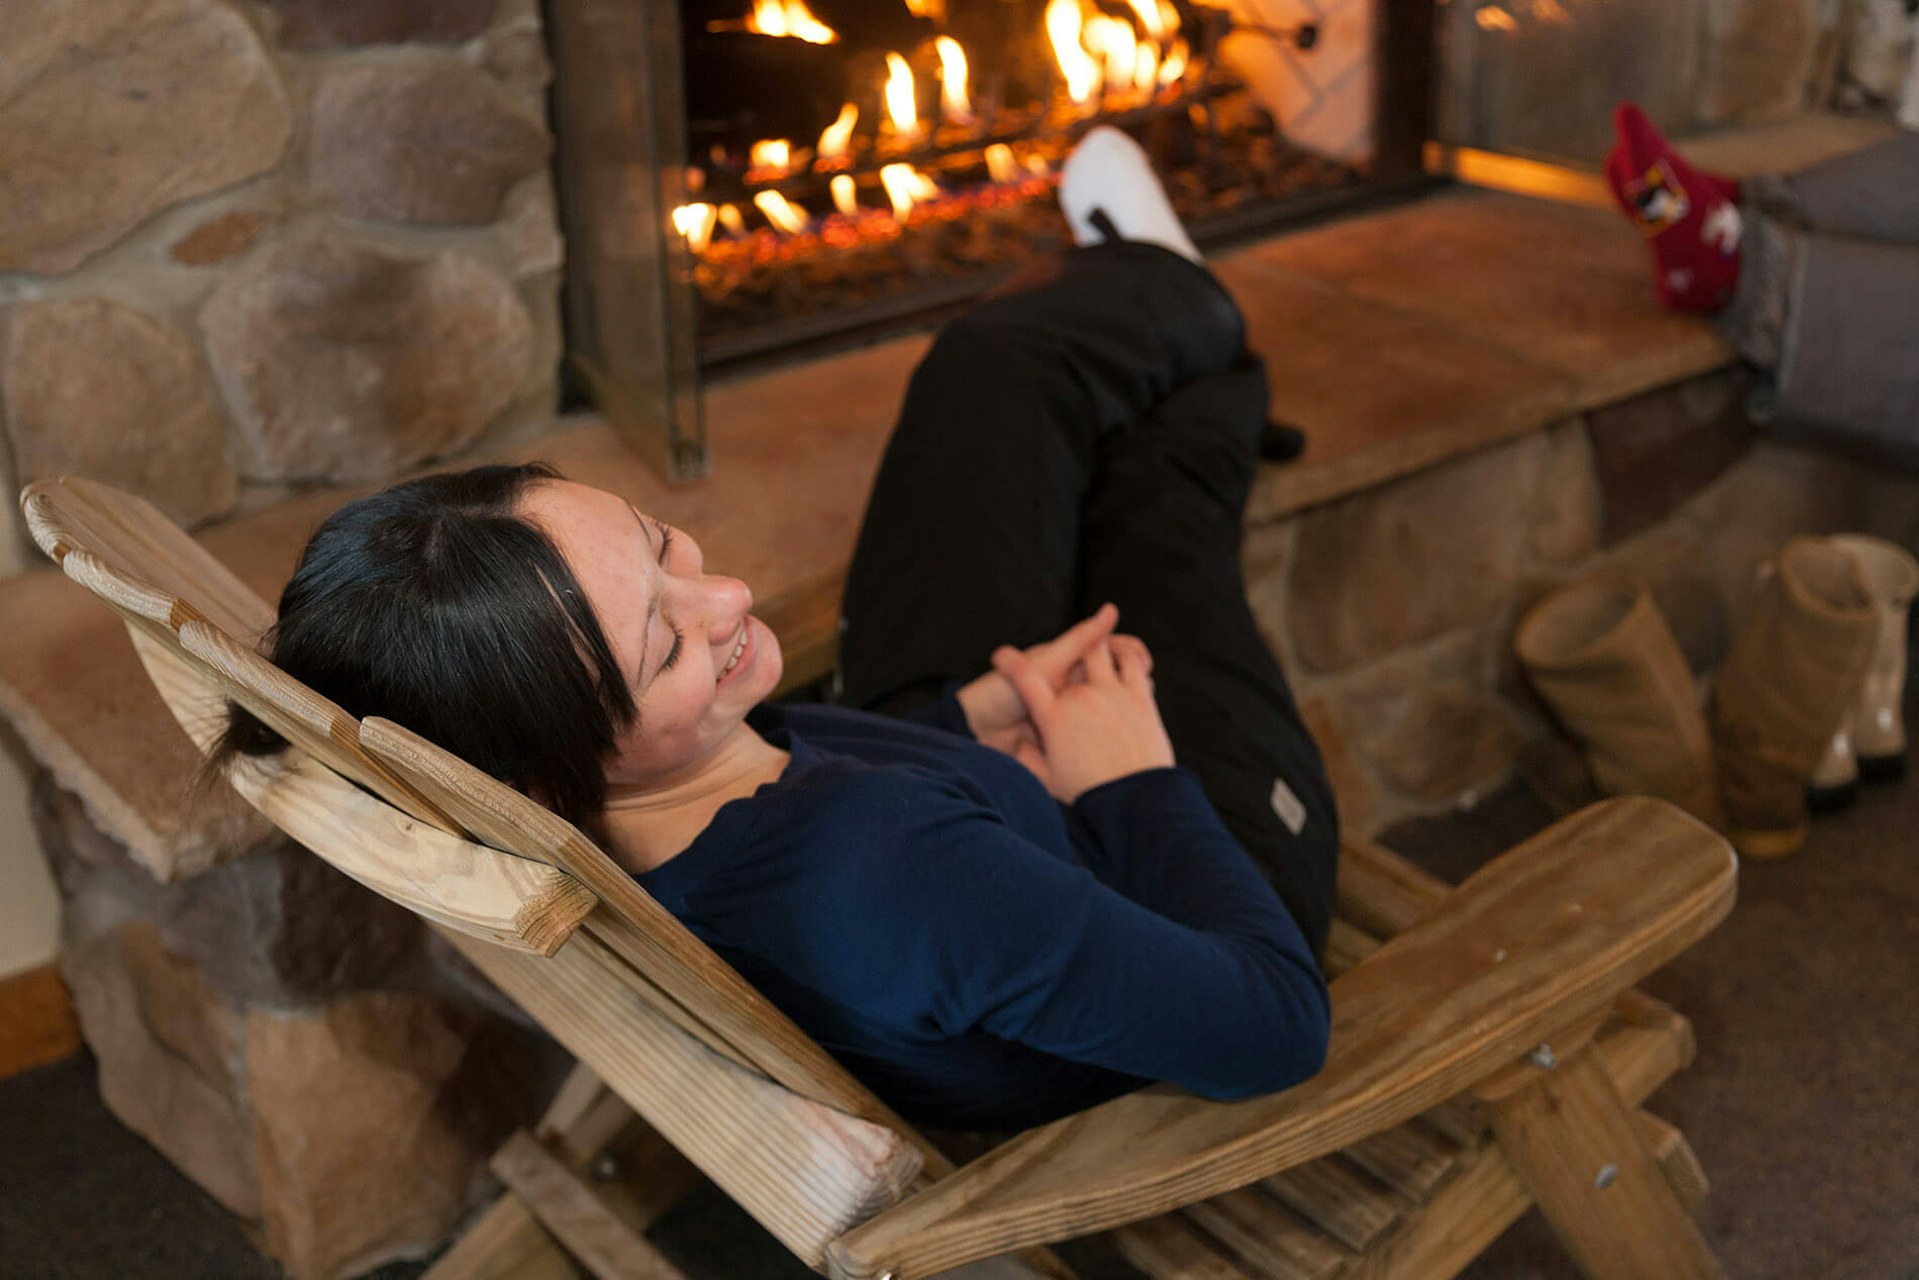 Woman In front of Fireplace